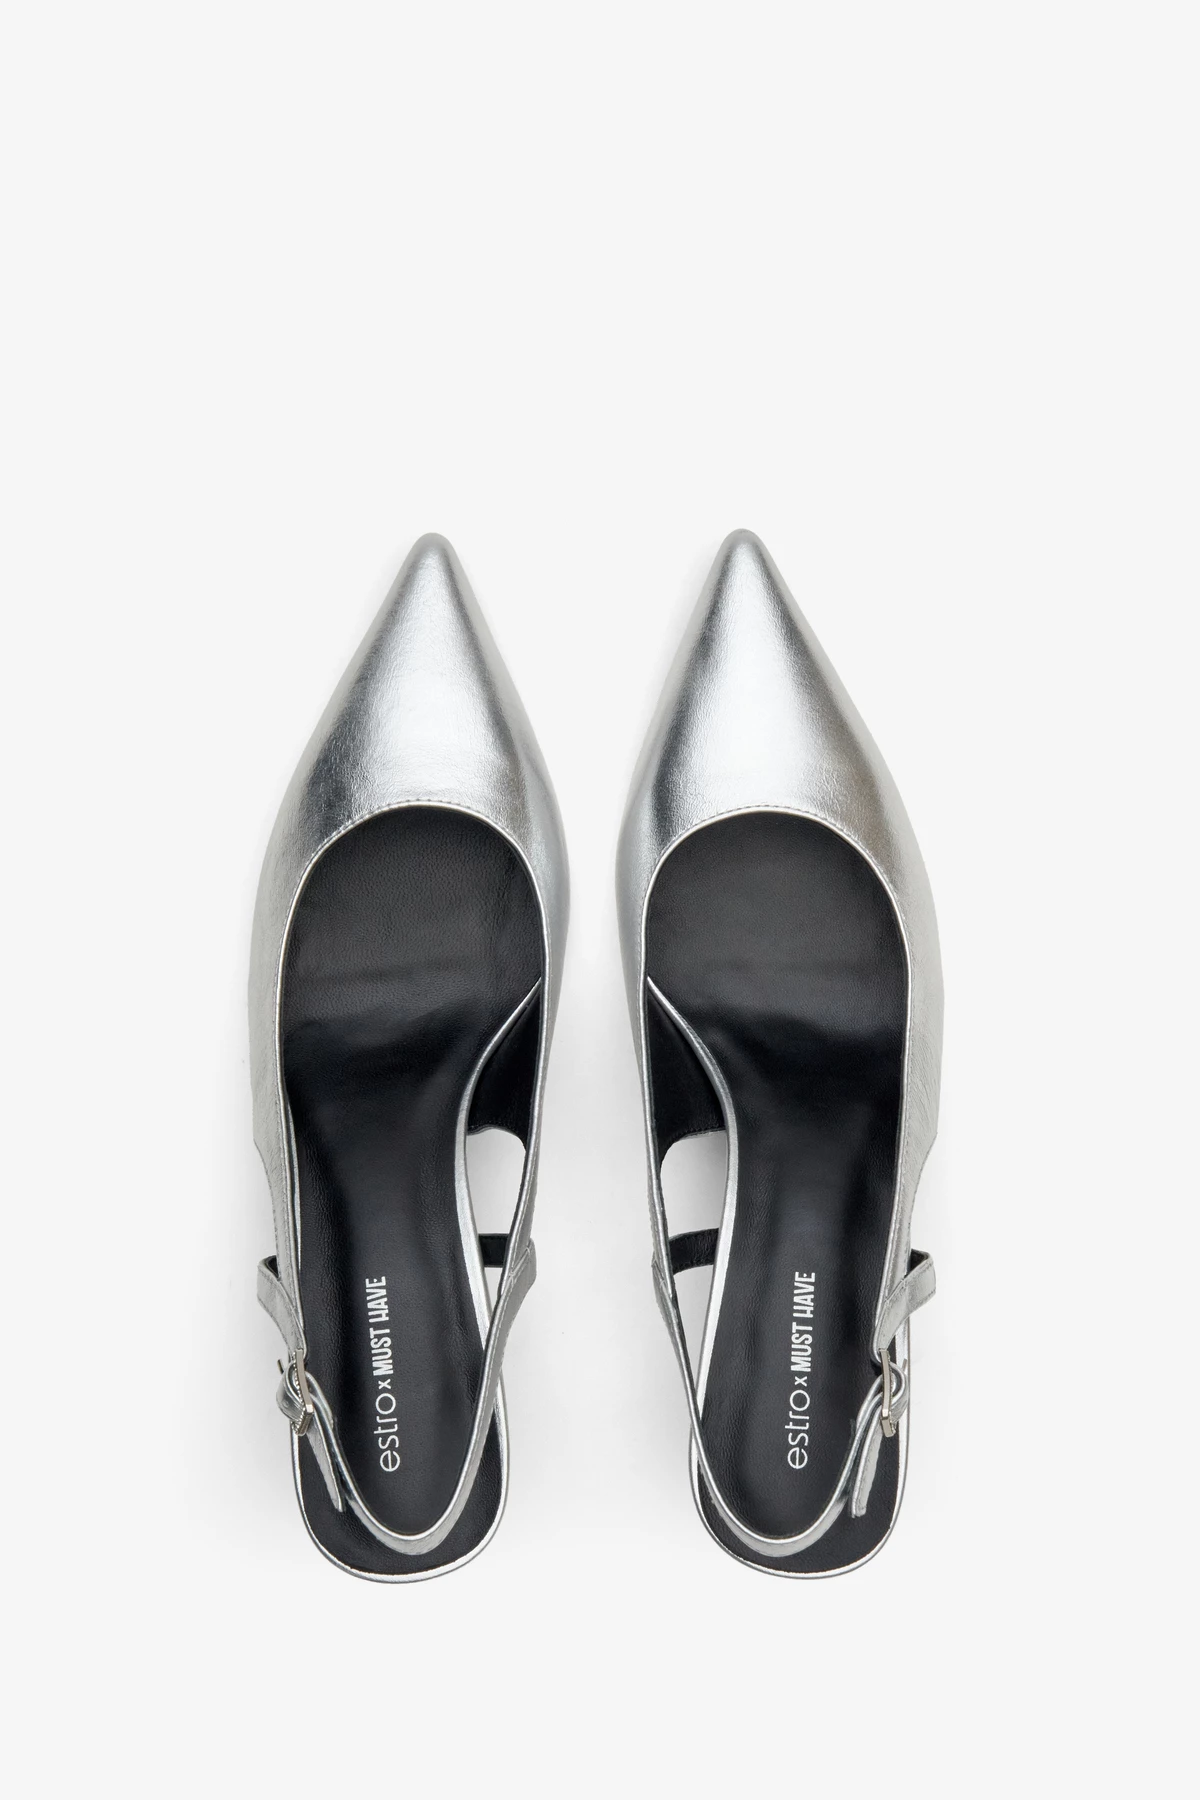 Silver leather slingbacks Estro x MustHave, photo 3